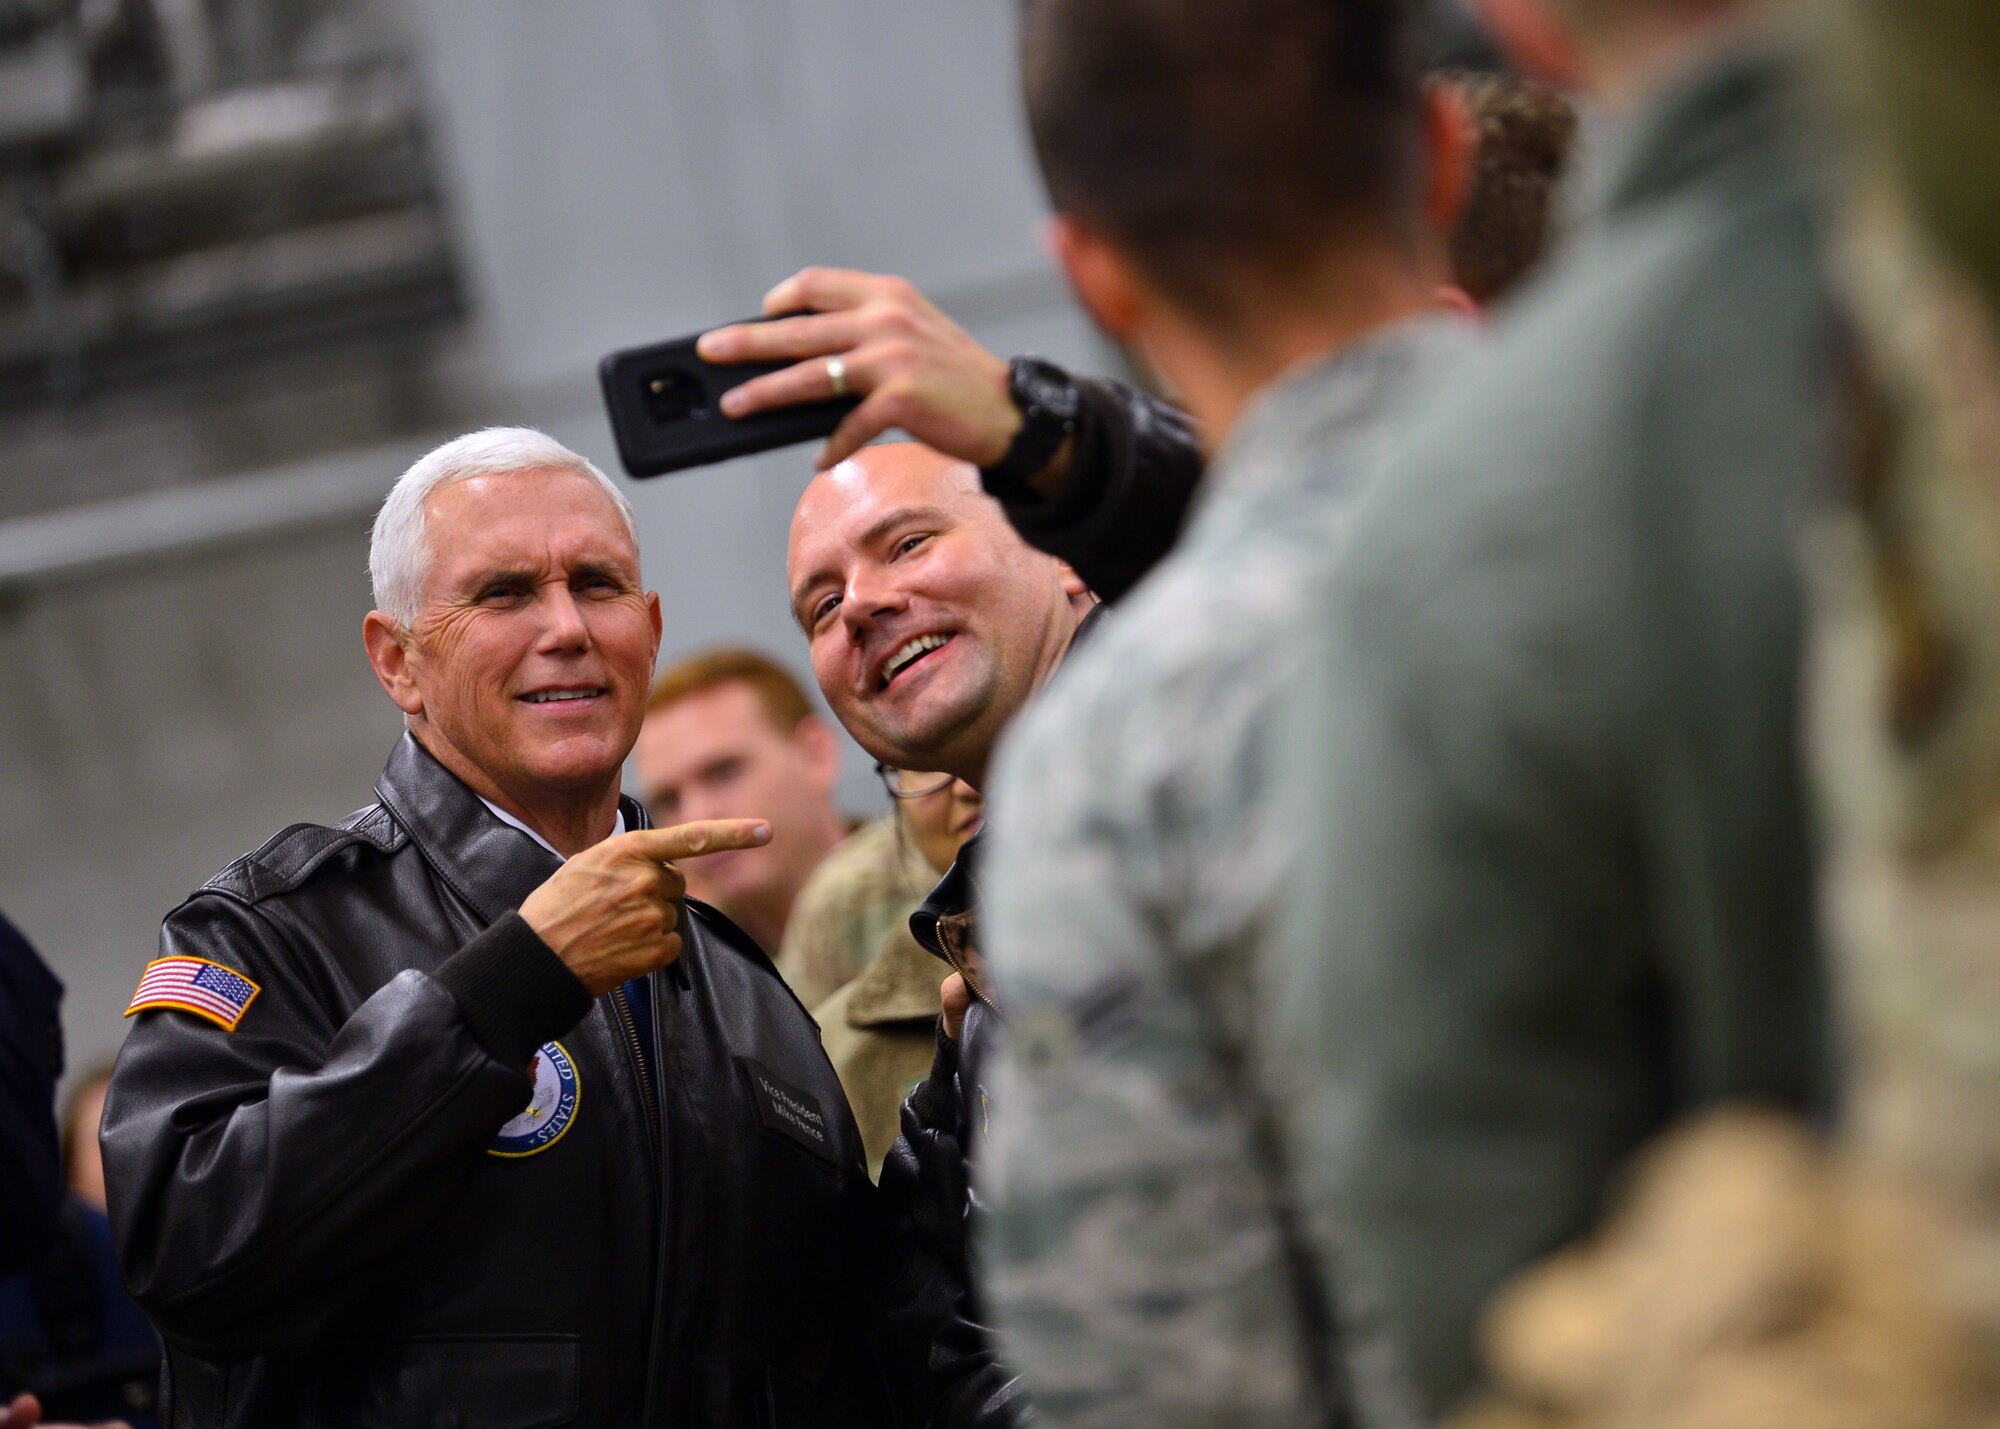 U.S. Vice President Mike Pence takes a photo with an Airman at an all-call on Ramstein Air Base, Germany, Oct. 18, 2019. After addressing Airmen, Pence took time to meet them and show his support for their dedication to freedom. (U.S. Air Force photo by Staff Sgt. Jimmie D. Pike)